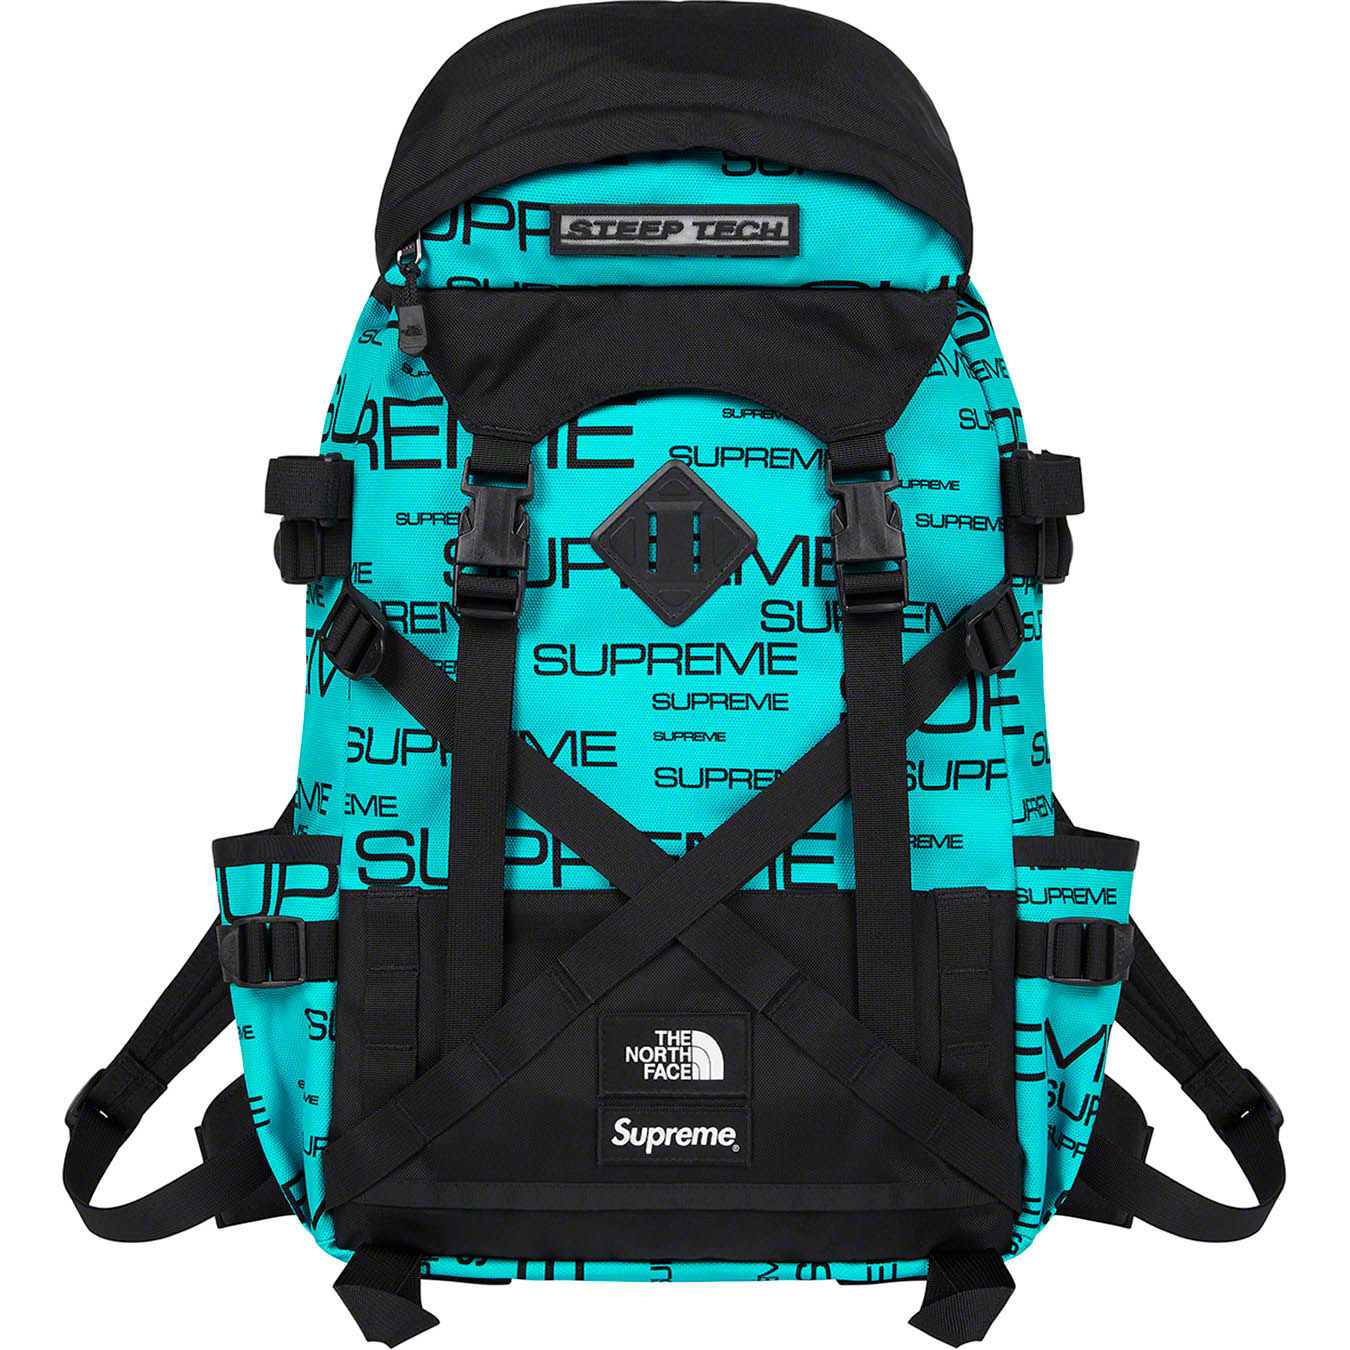 Supreme®/The North Face® Steep Tech Backpack | Supreme 21fw